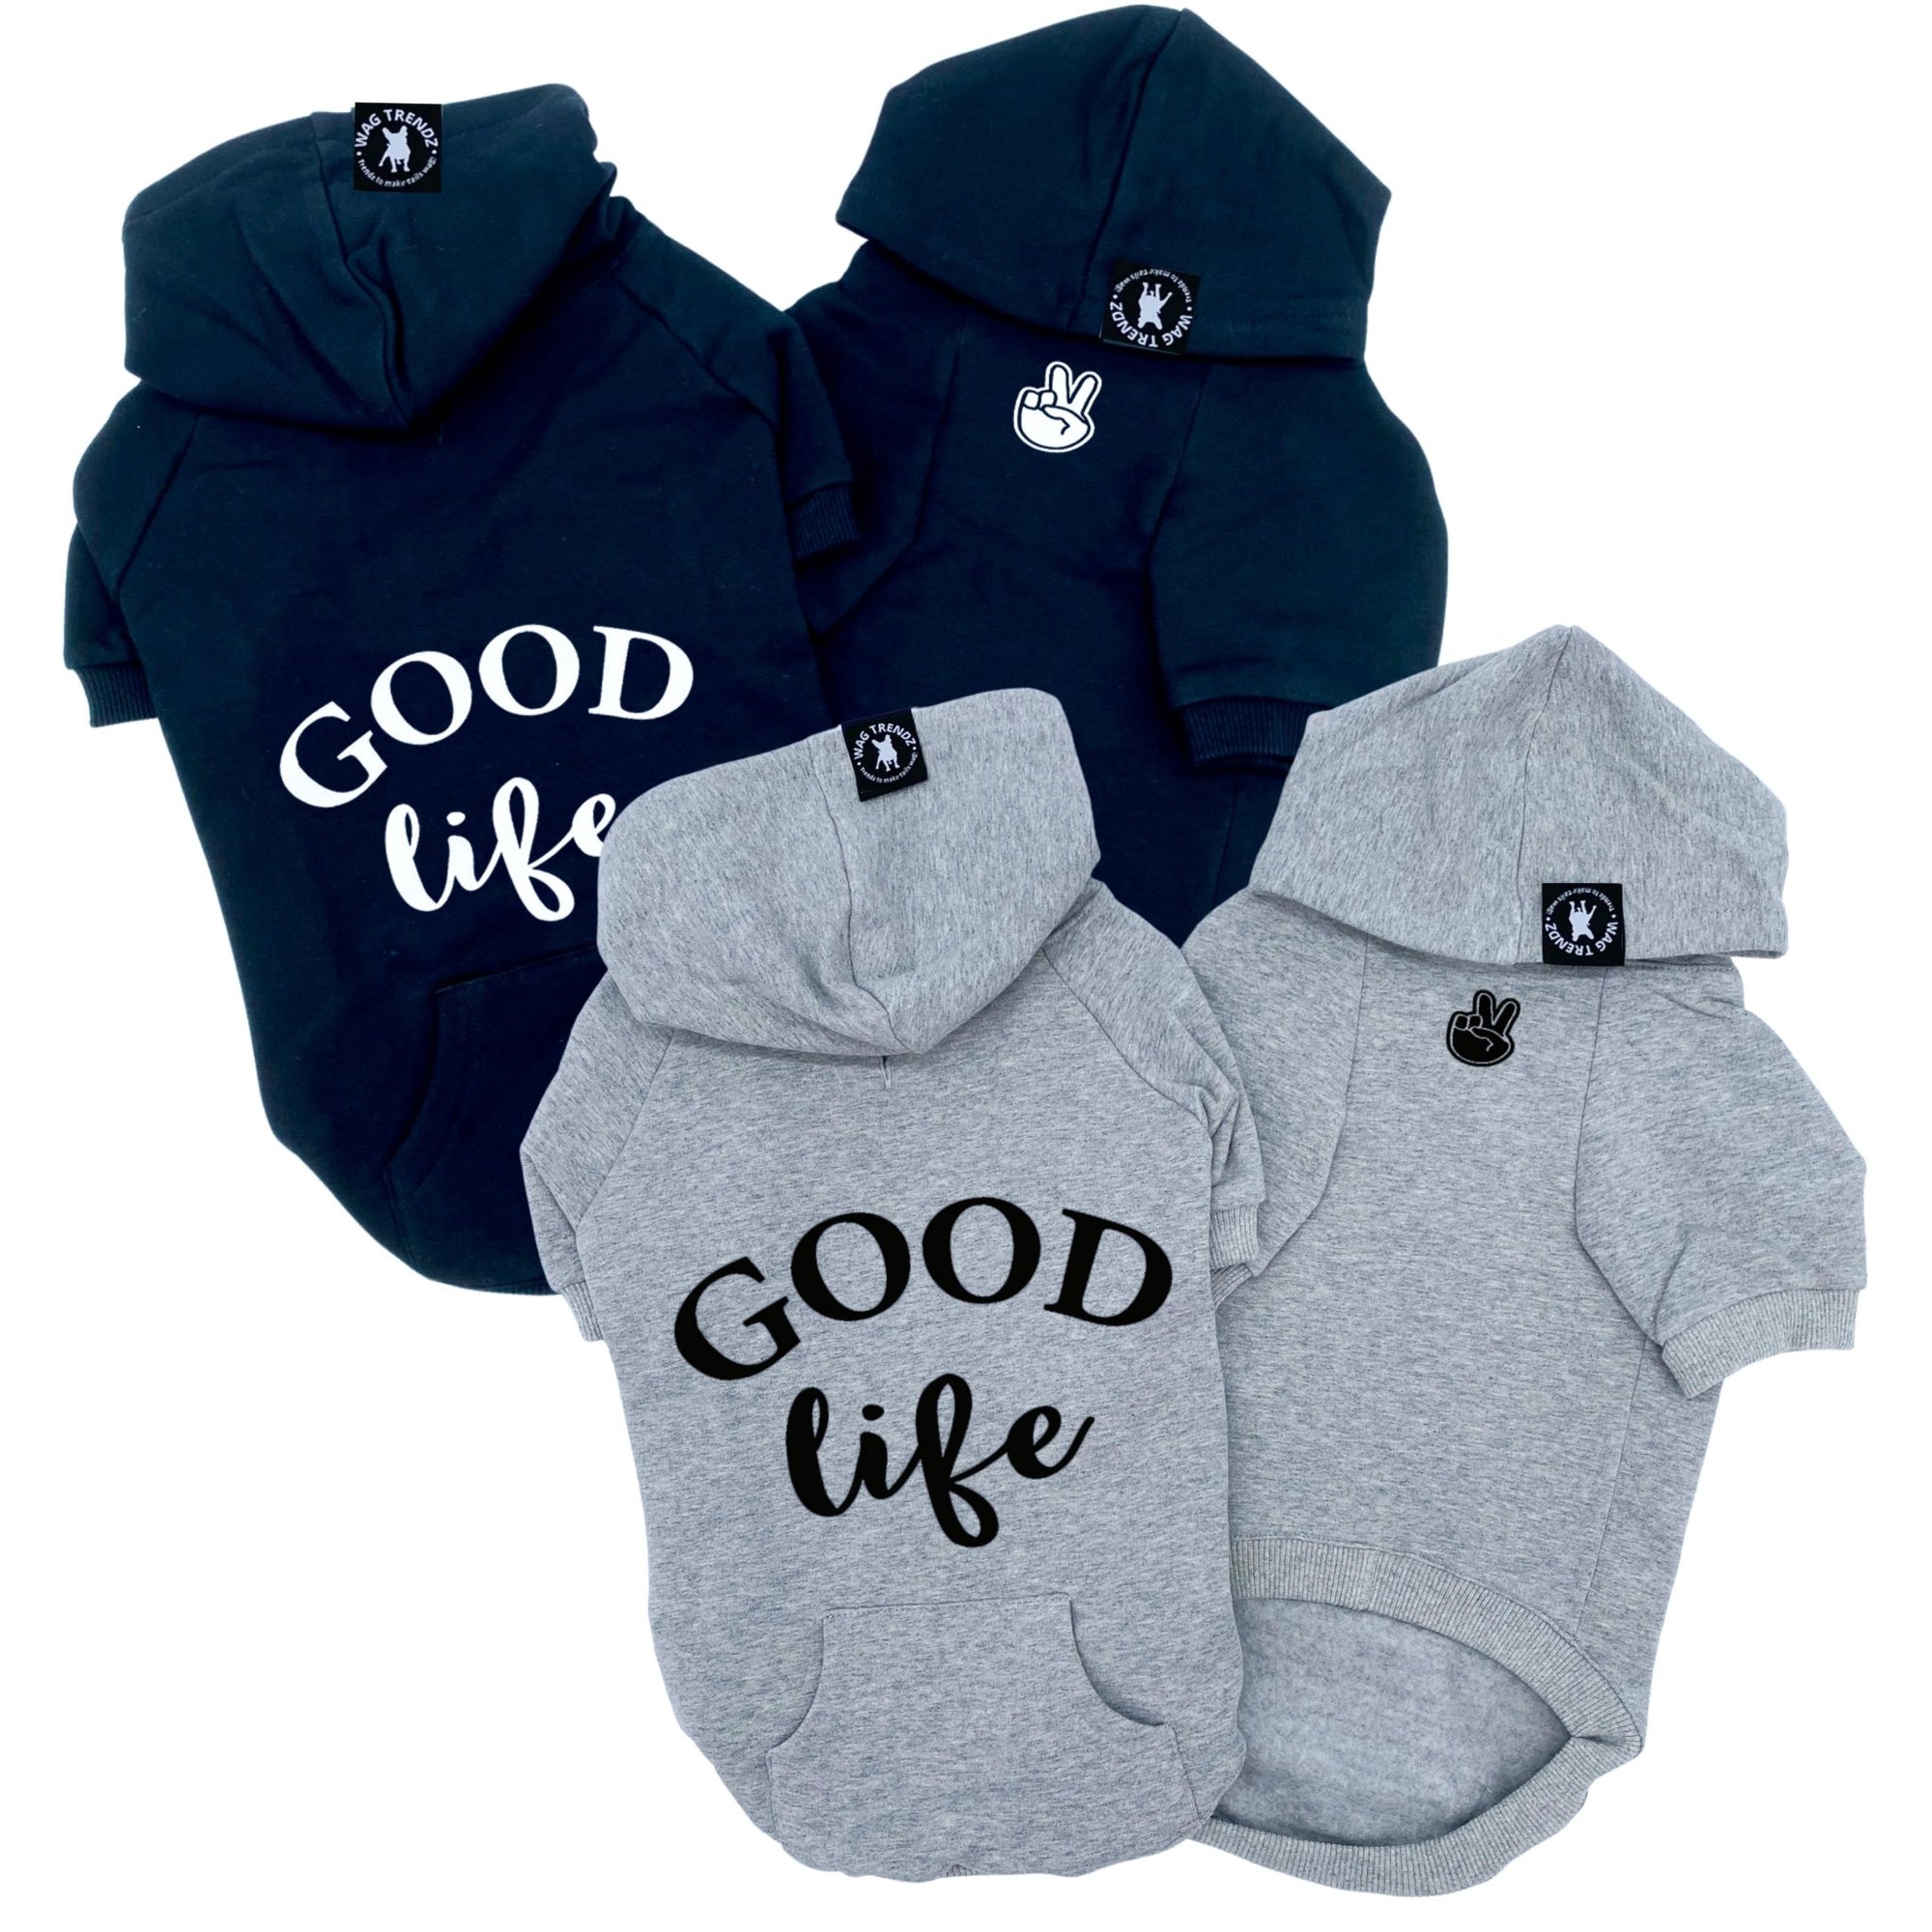 Dog Hoodie - Hoodies For Dogs - &quot;Good Life&quot; dog hoodies in black and gray sets - Good Life on the back and finger peace sign emoji on front chest - against solid white background - Wag Trendz